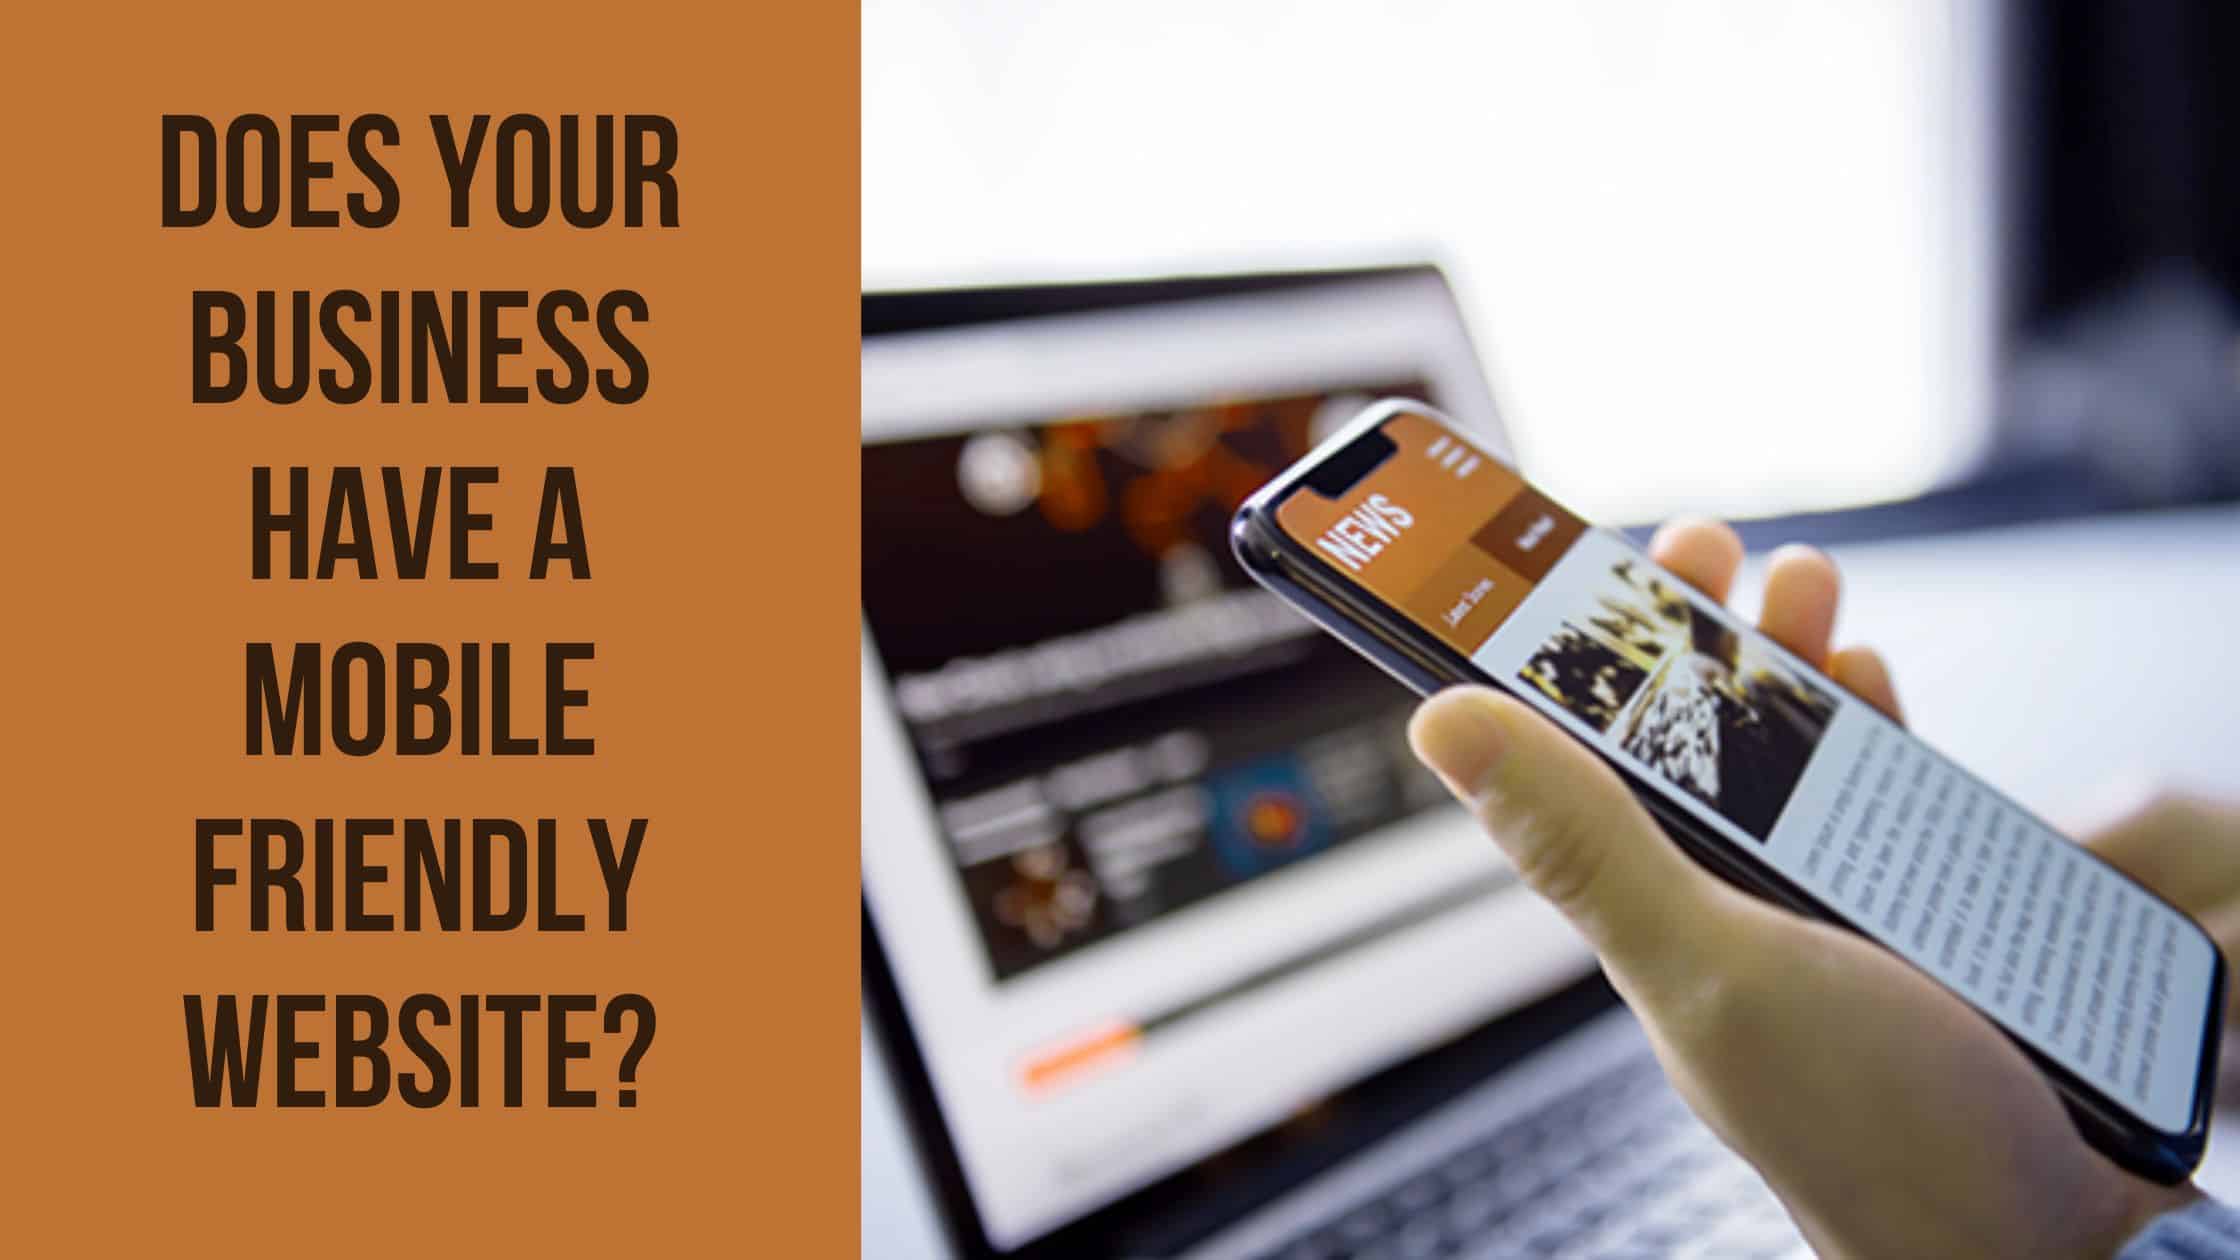 Does Your Business Have a Mobile Friendly Website